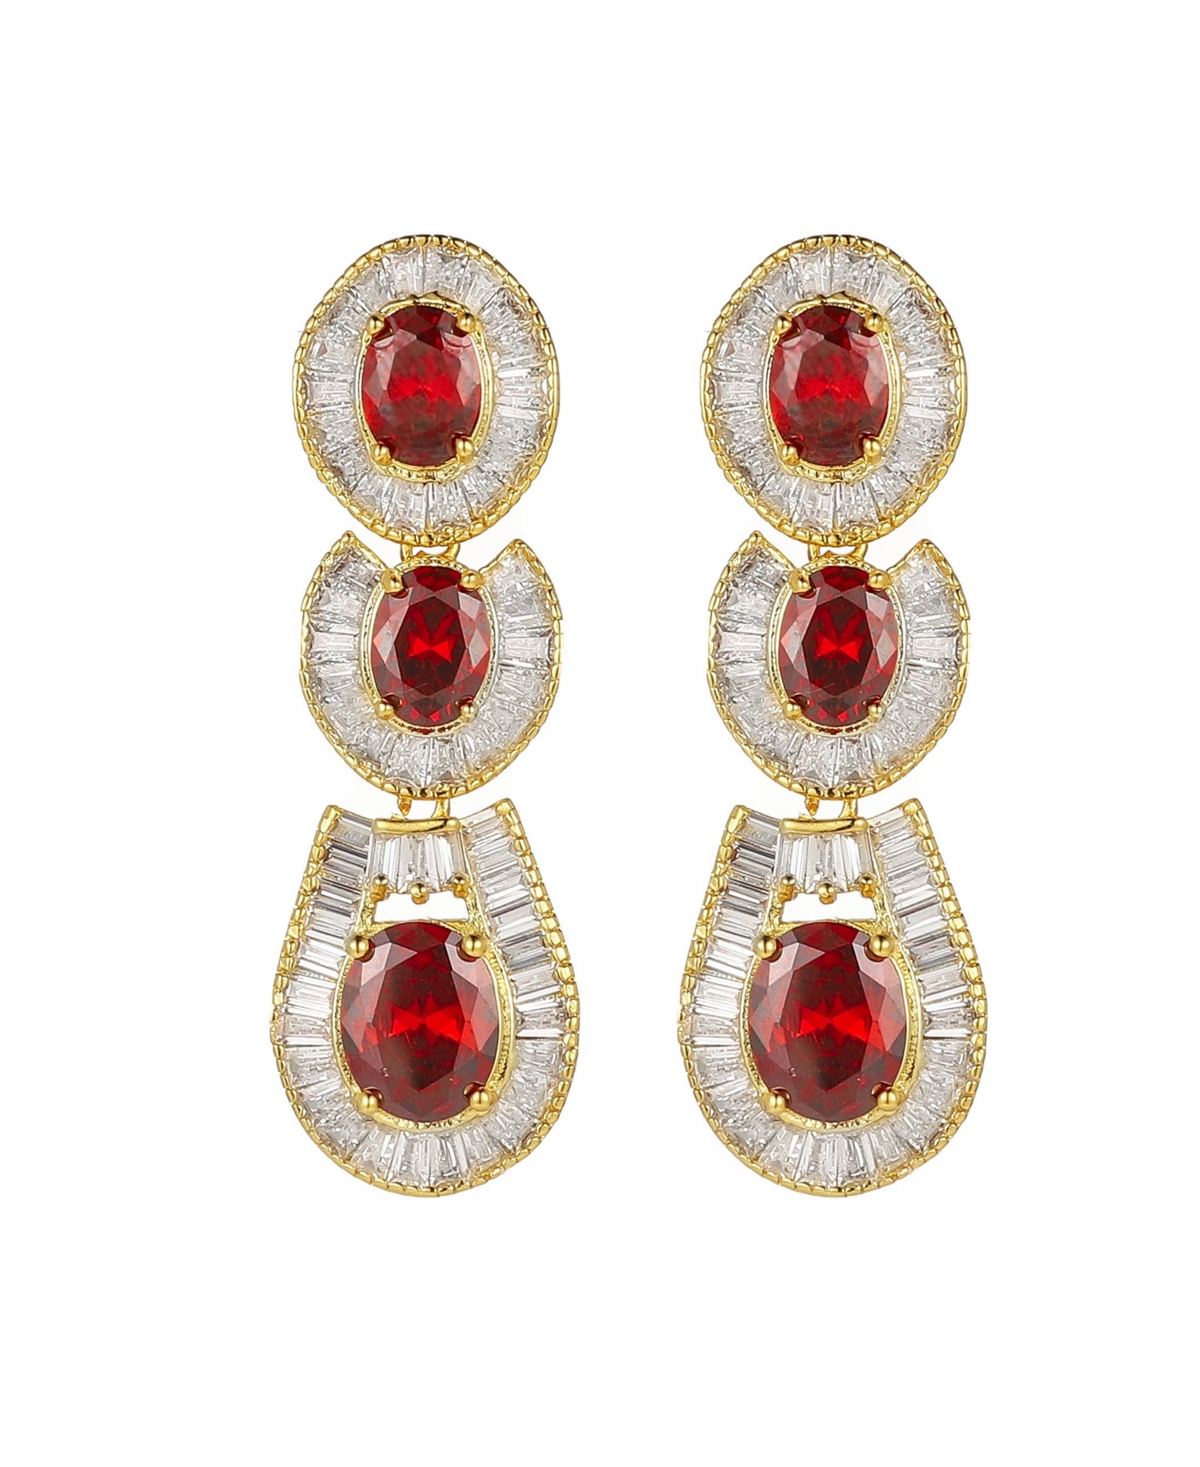 A & M Gold-Tone Ruby Accent Tribal Drop Earrings